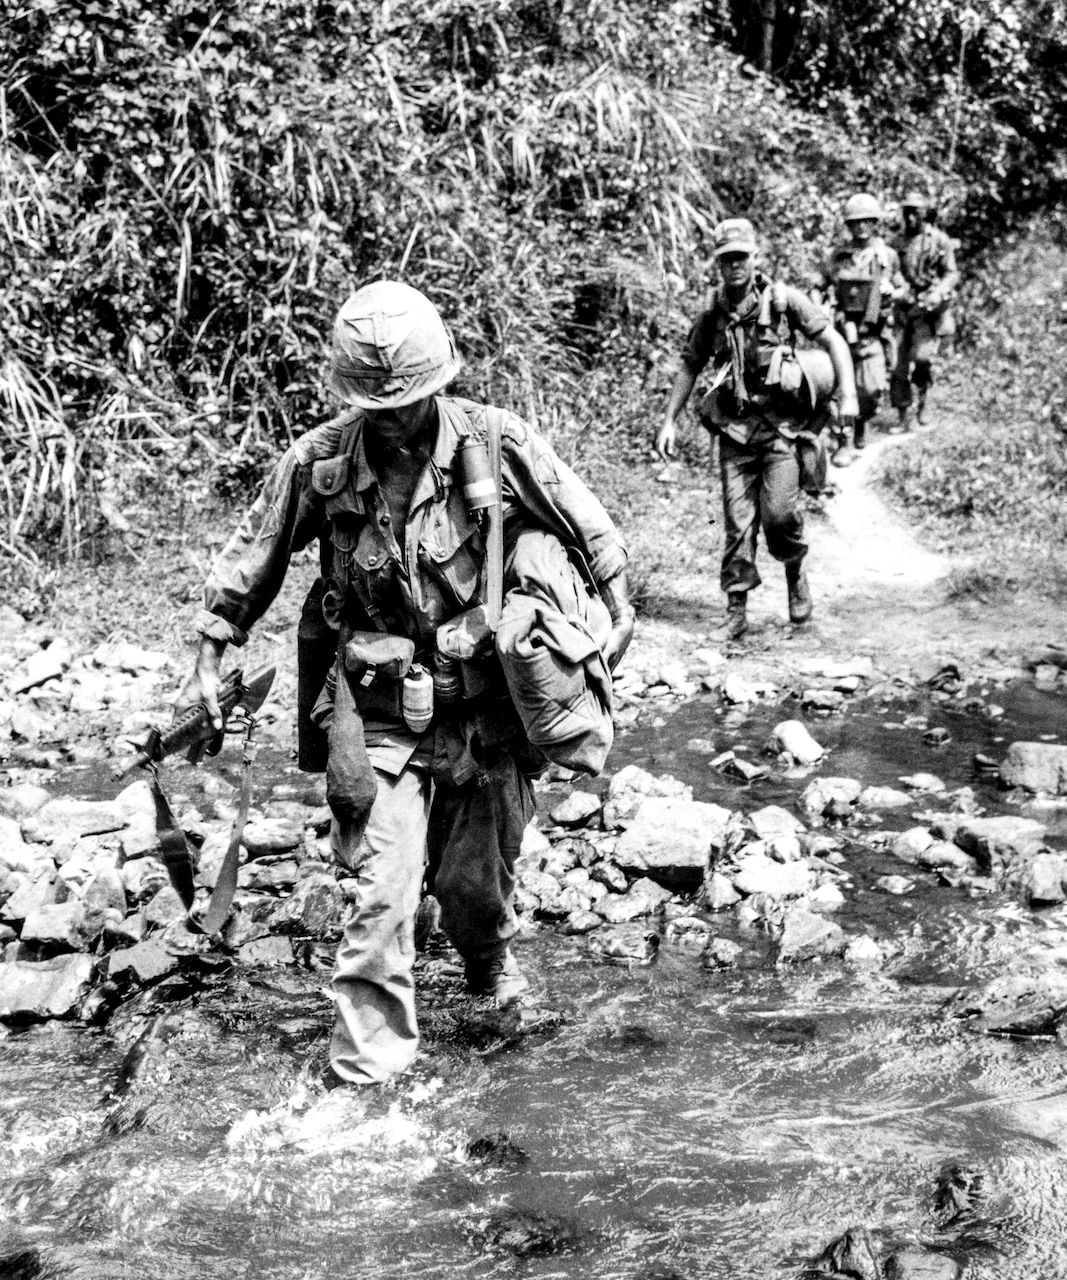 A man in combat uniform crosses an ankle-deep creek. Other men follow behind him on a trail coming out of the woods.